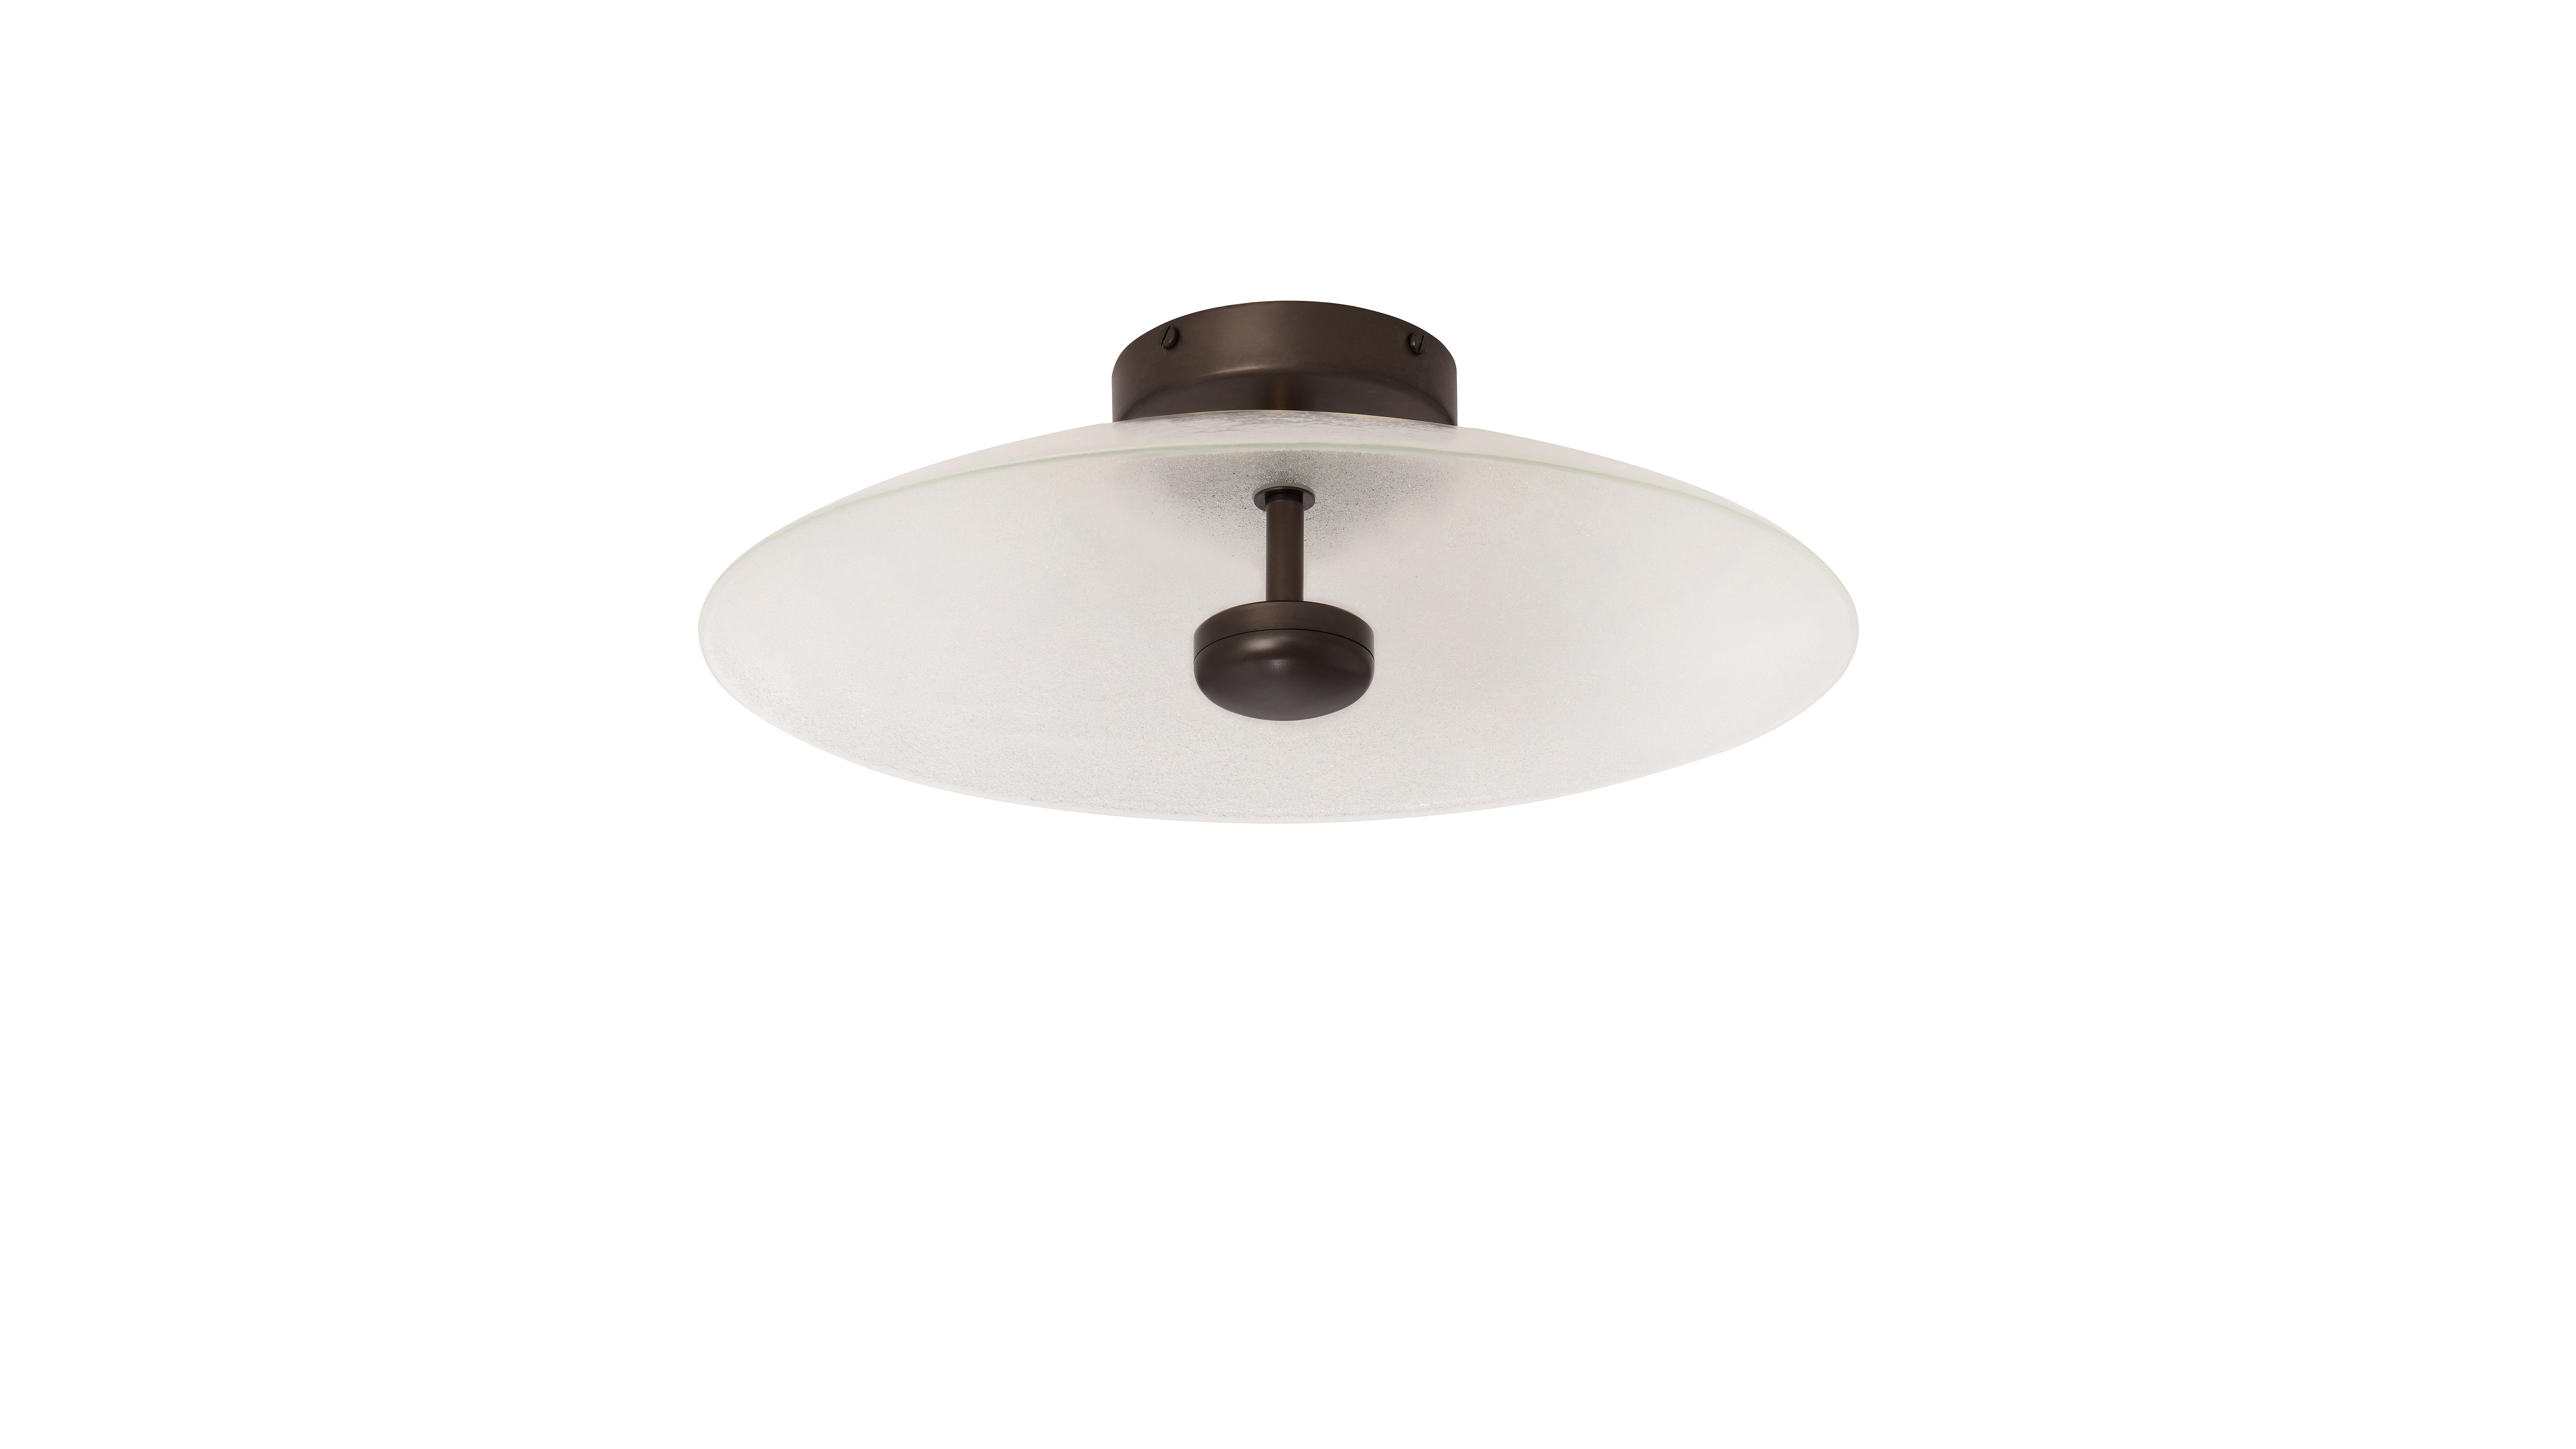 Bronze Cielo large ceiling lamp by CTO Lighting
Materials: Bronze with hand fritted glass
Dimensions: W 38.5 x D 38.5 x H 13 cm

Integrated LED - trailing dimmable - 8w - 2700k 
Weight 4.5kg (9.9lbs)
Mounts onto 4” junction box

All our